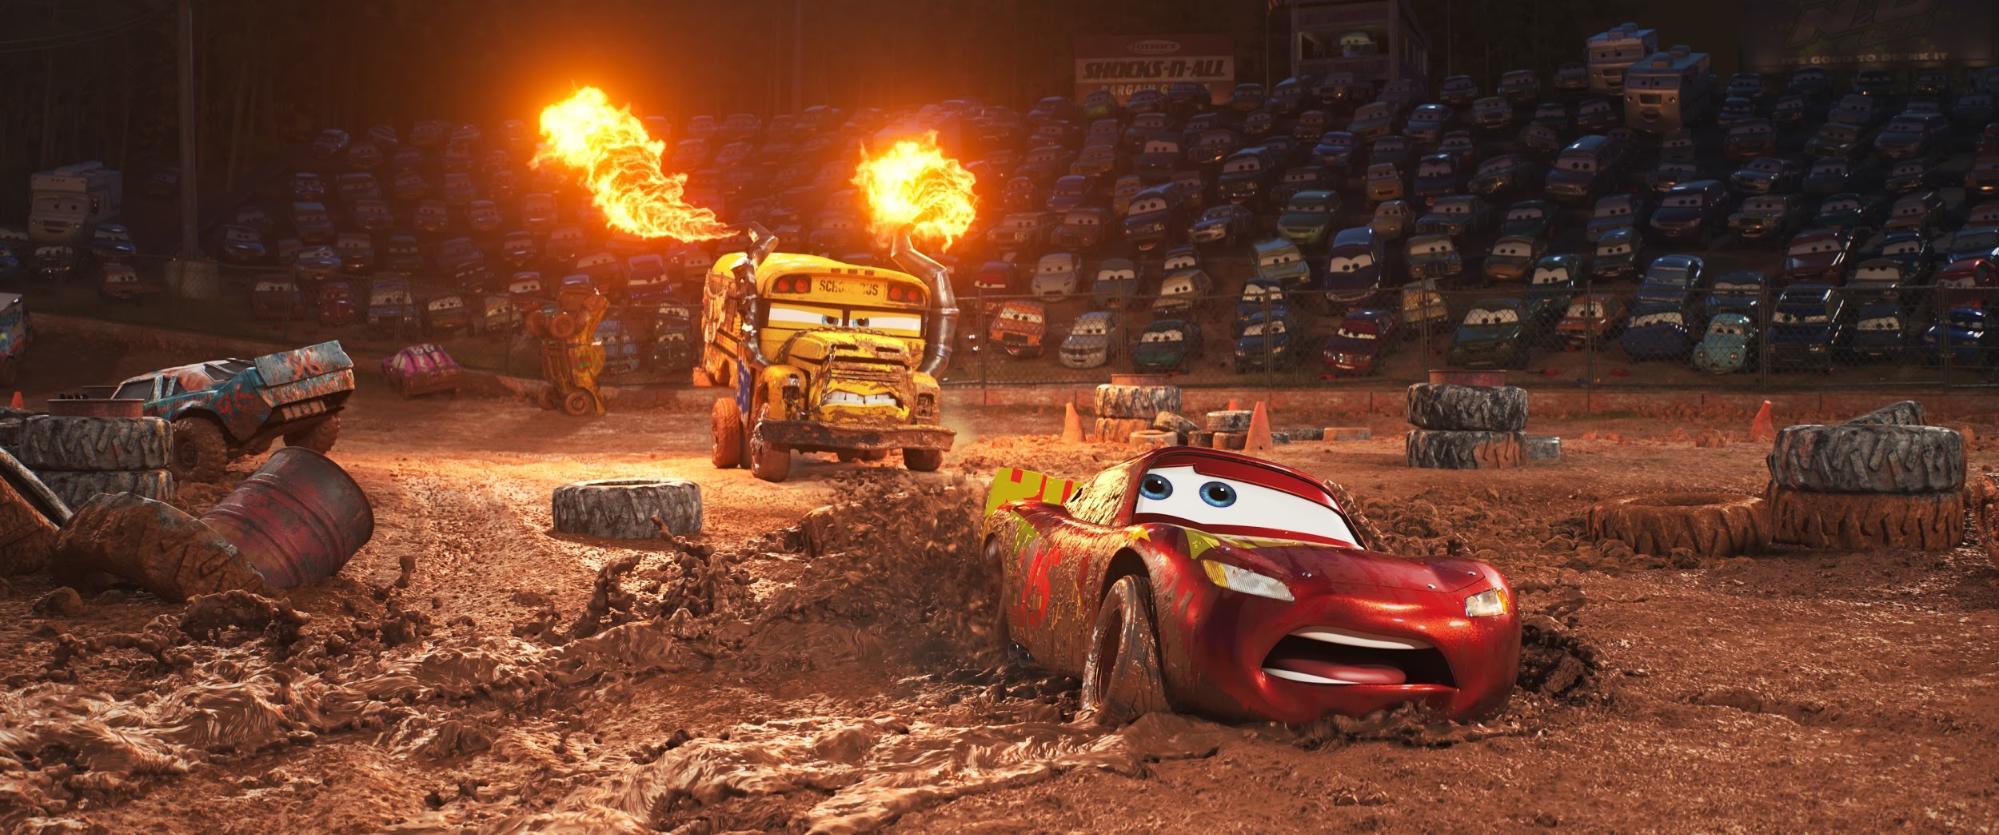 Pixar Worked Really Hard on the Mud in 